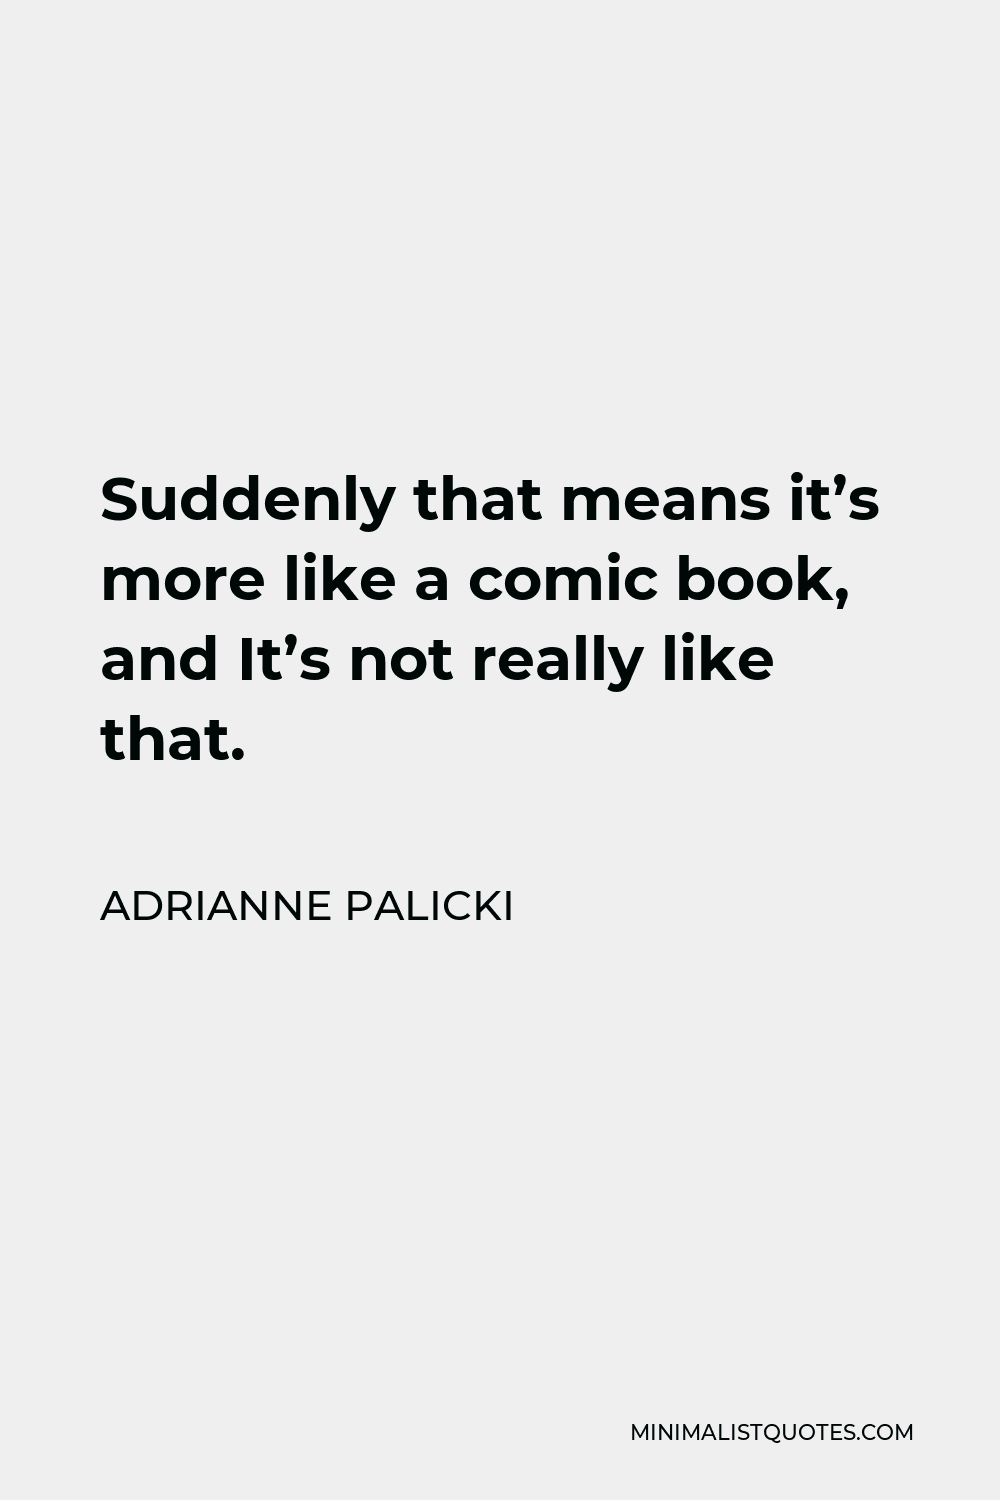 Adrianne Palicki Quote - Suddenly that means it’s more like a comic book, and It’s not really like that.